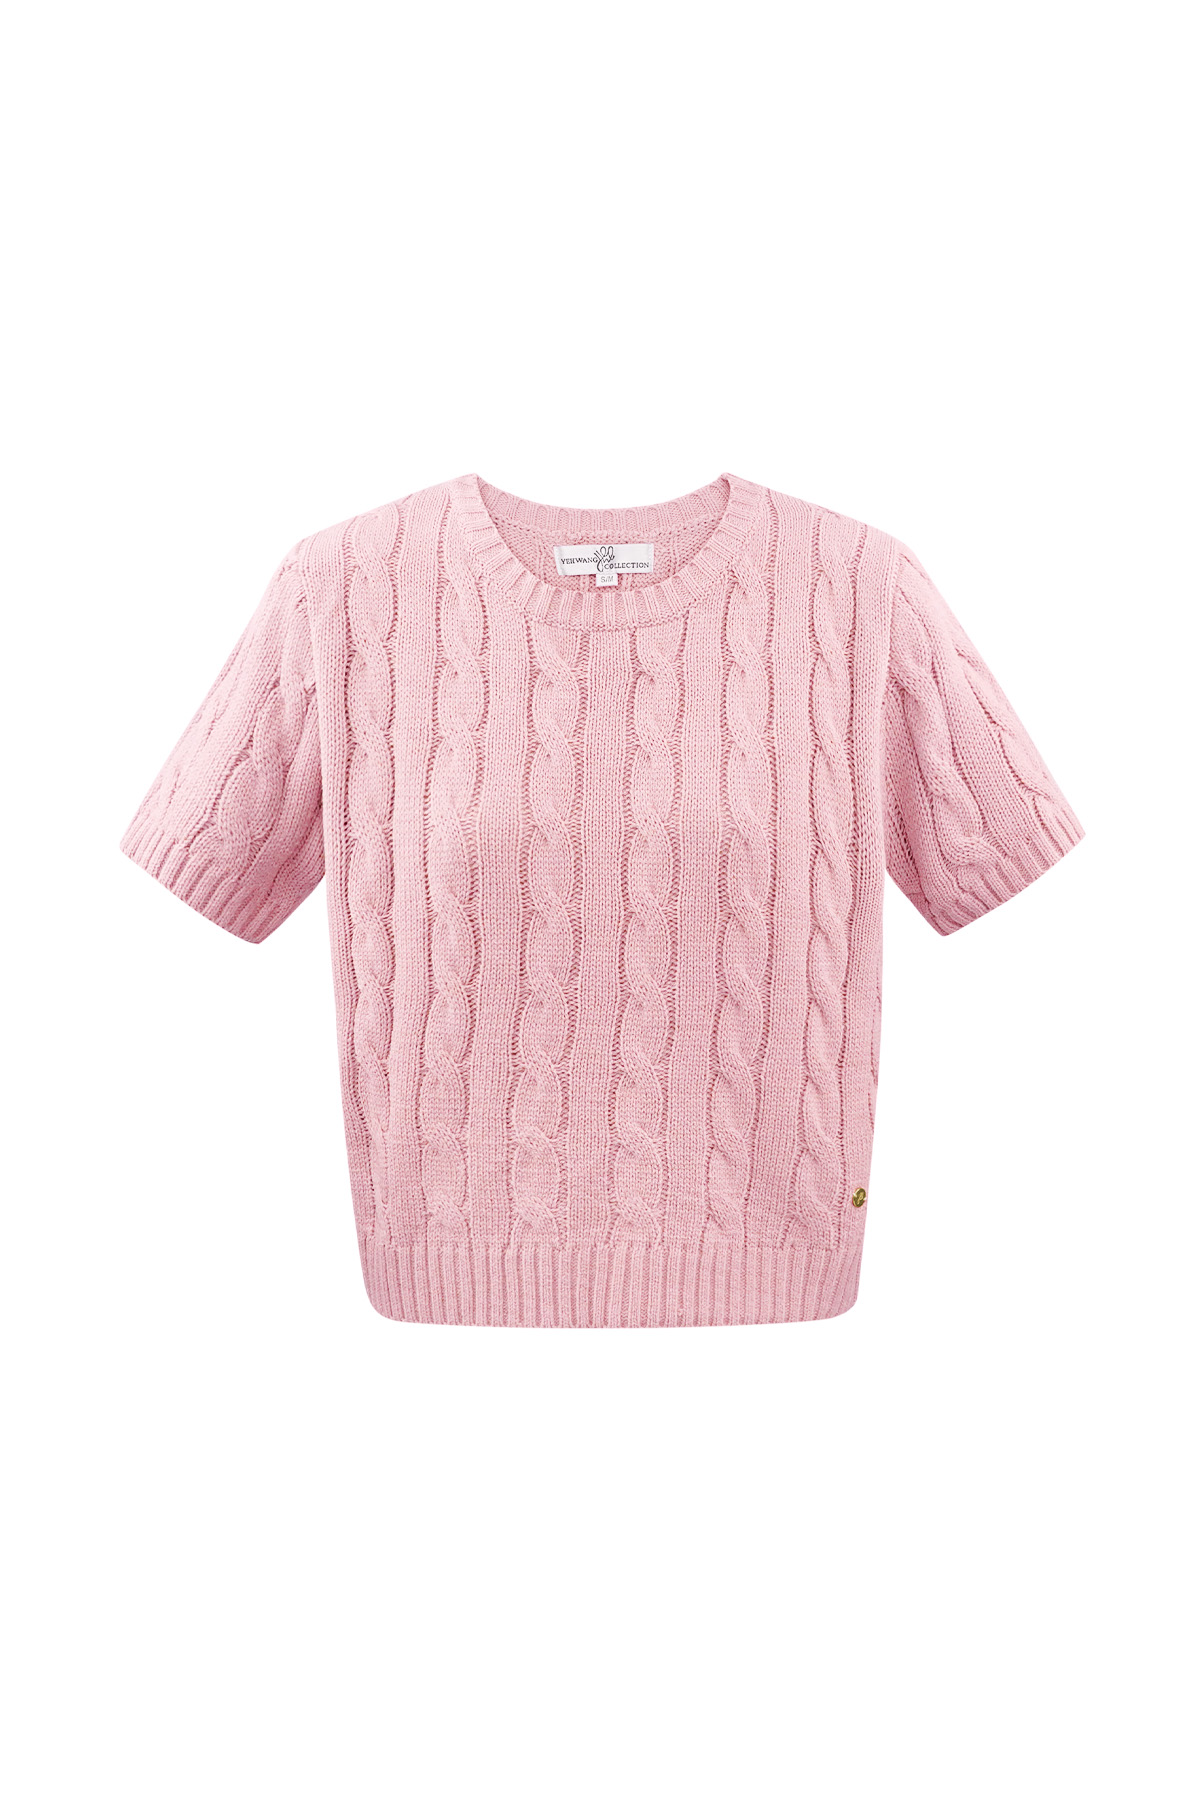 Classic knitted sweater with cables and short sleeves small/medium – pink